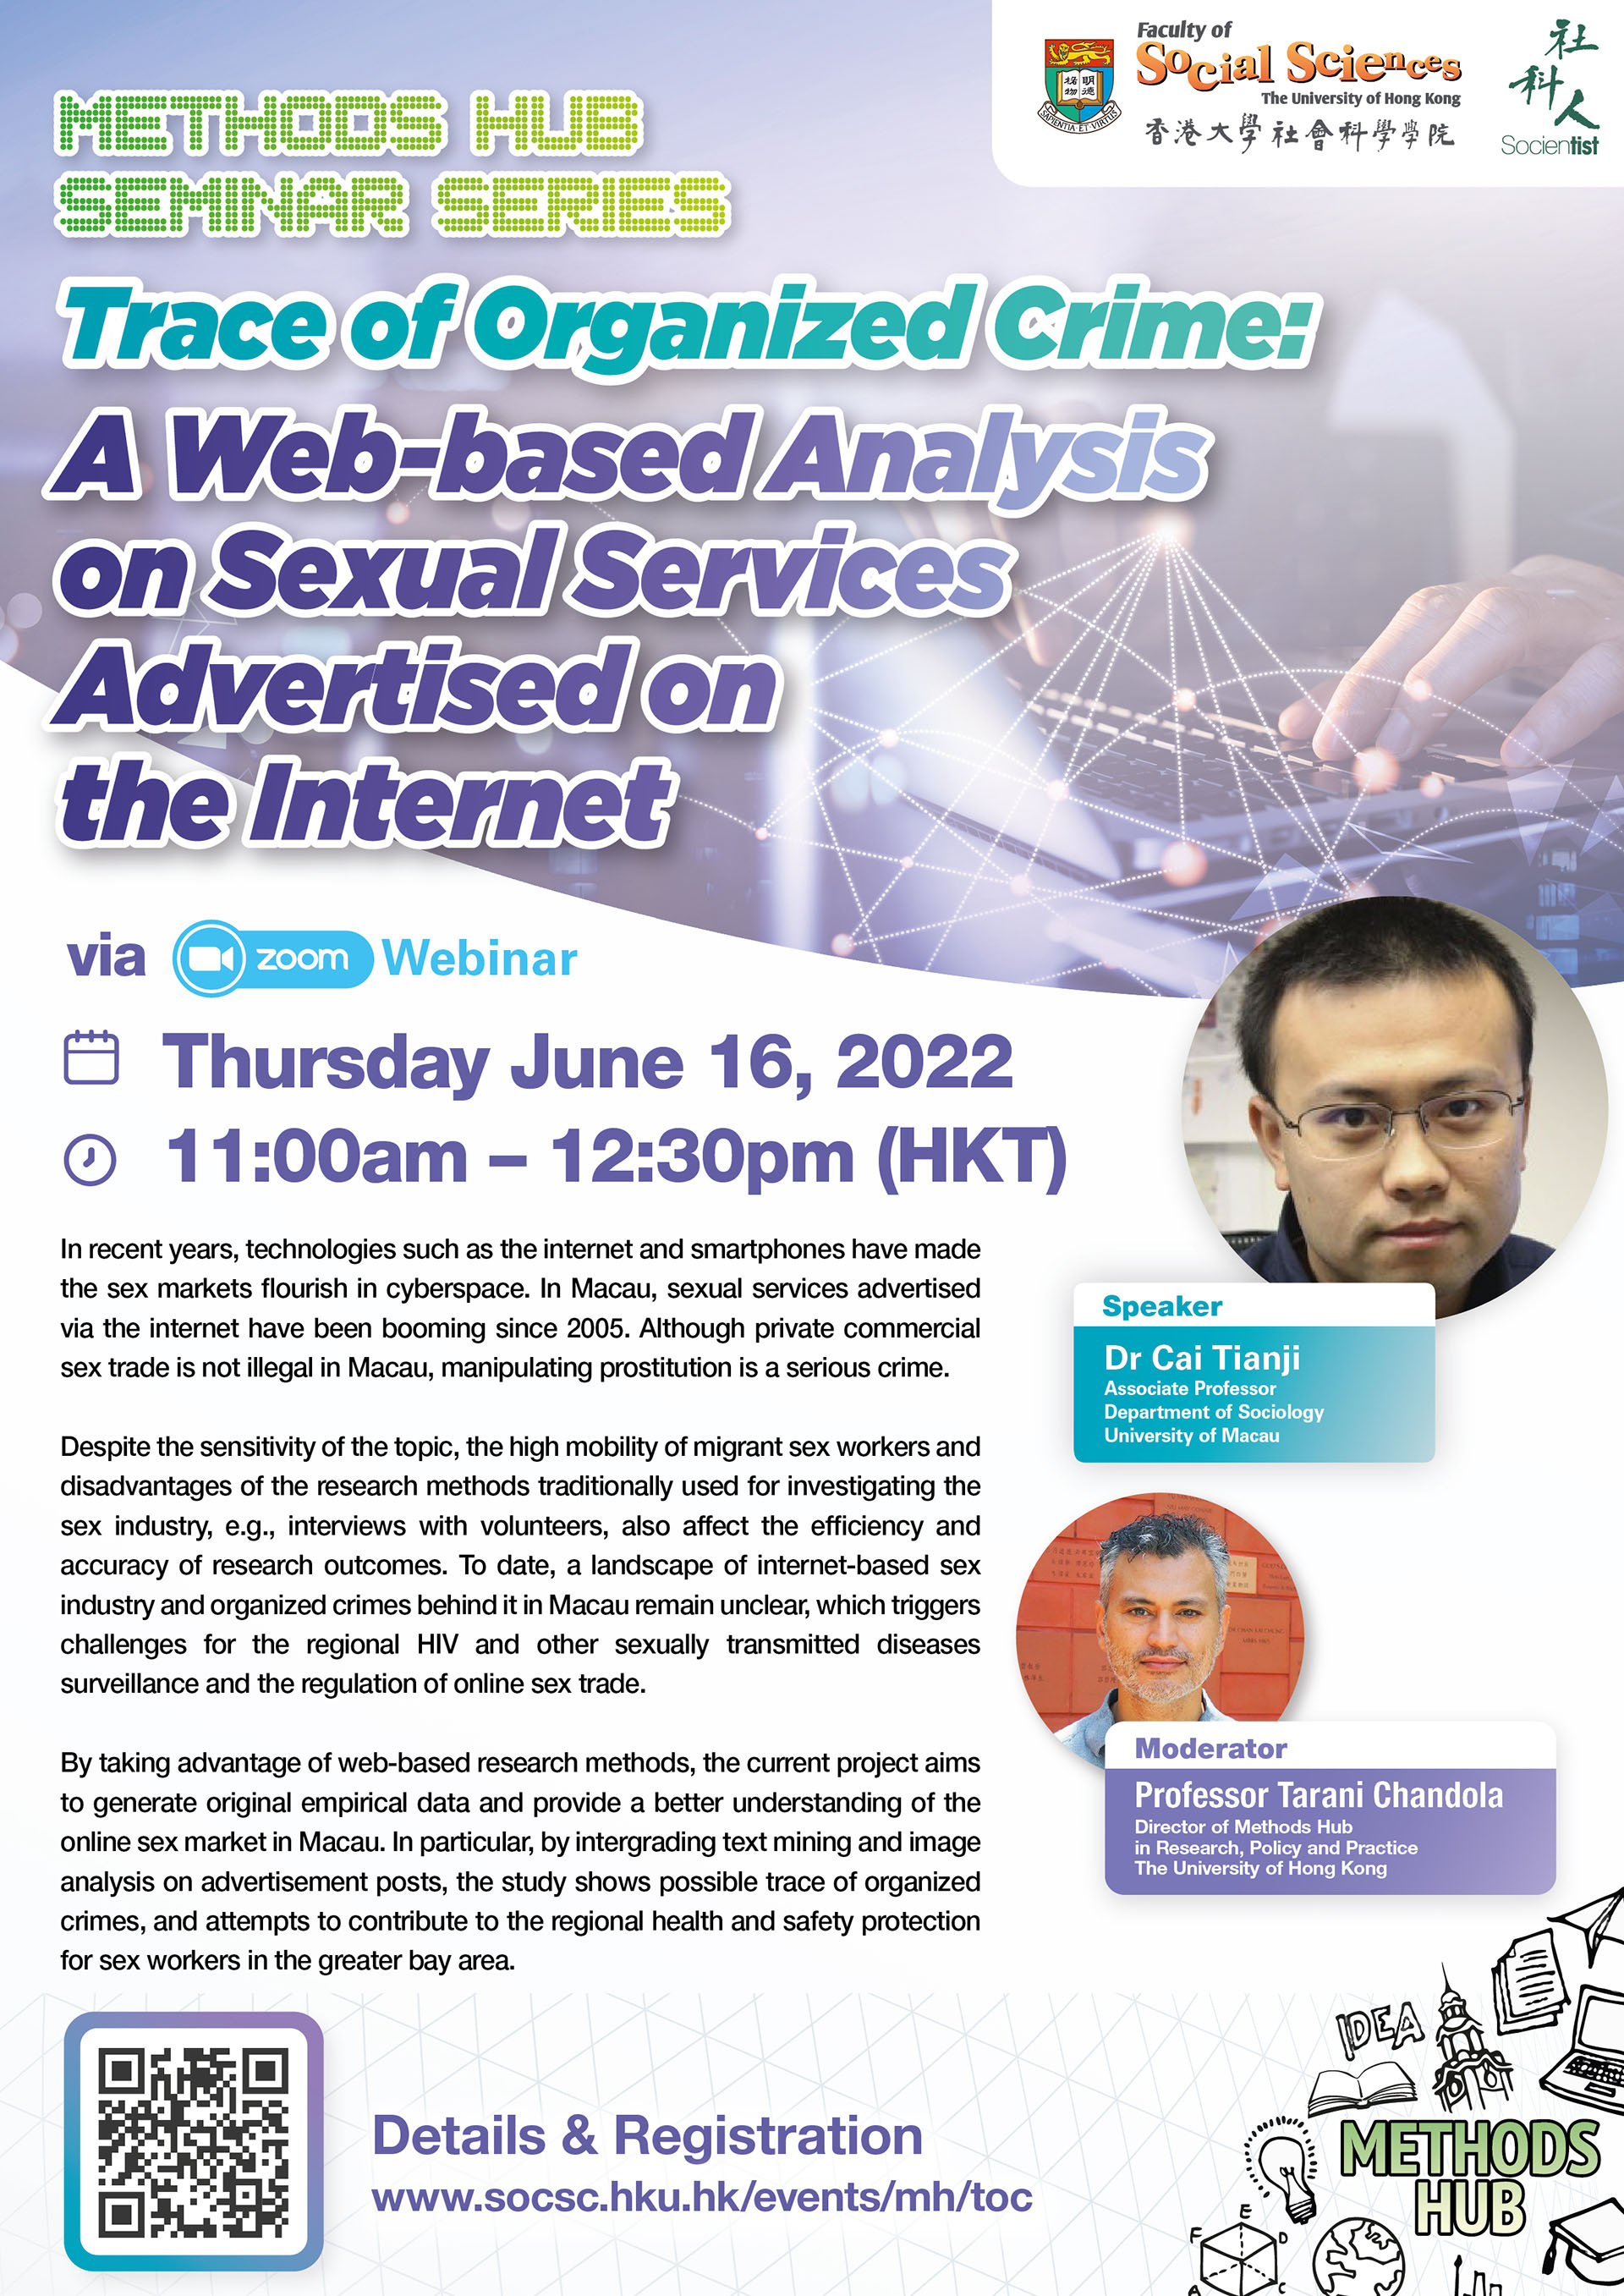 Methods Hub Seminar Series - Trace of Organized Crime: A Web-based Analysis on Sexual Services Advertised on the Internet (June 16, 11am)